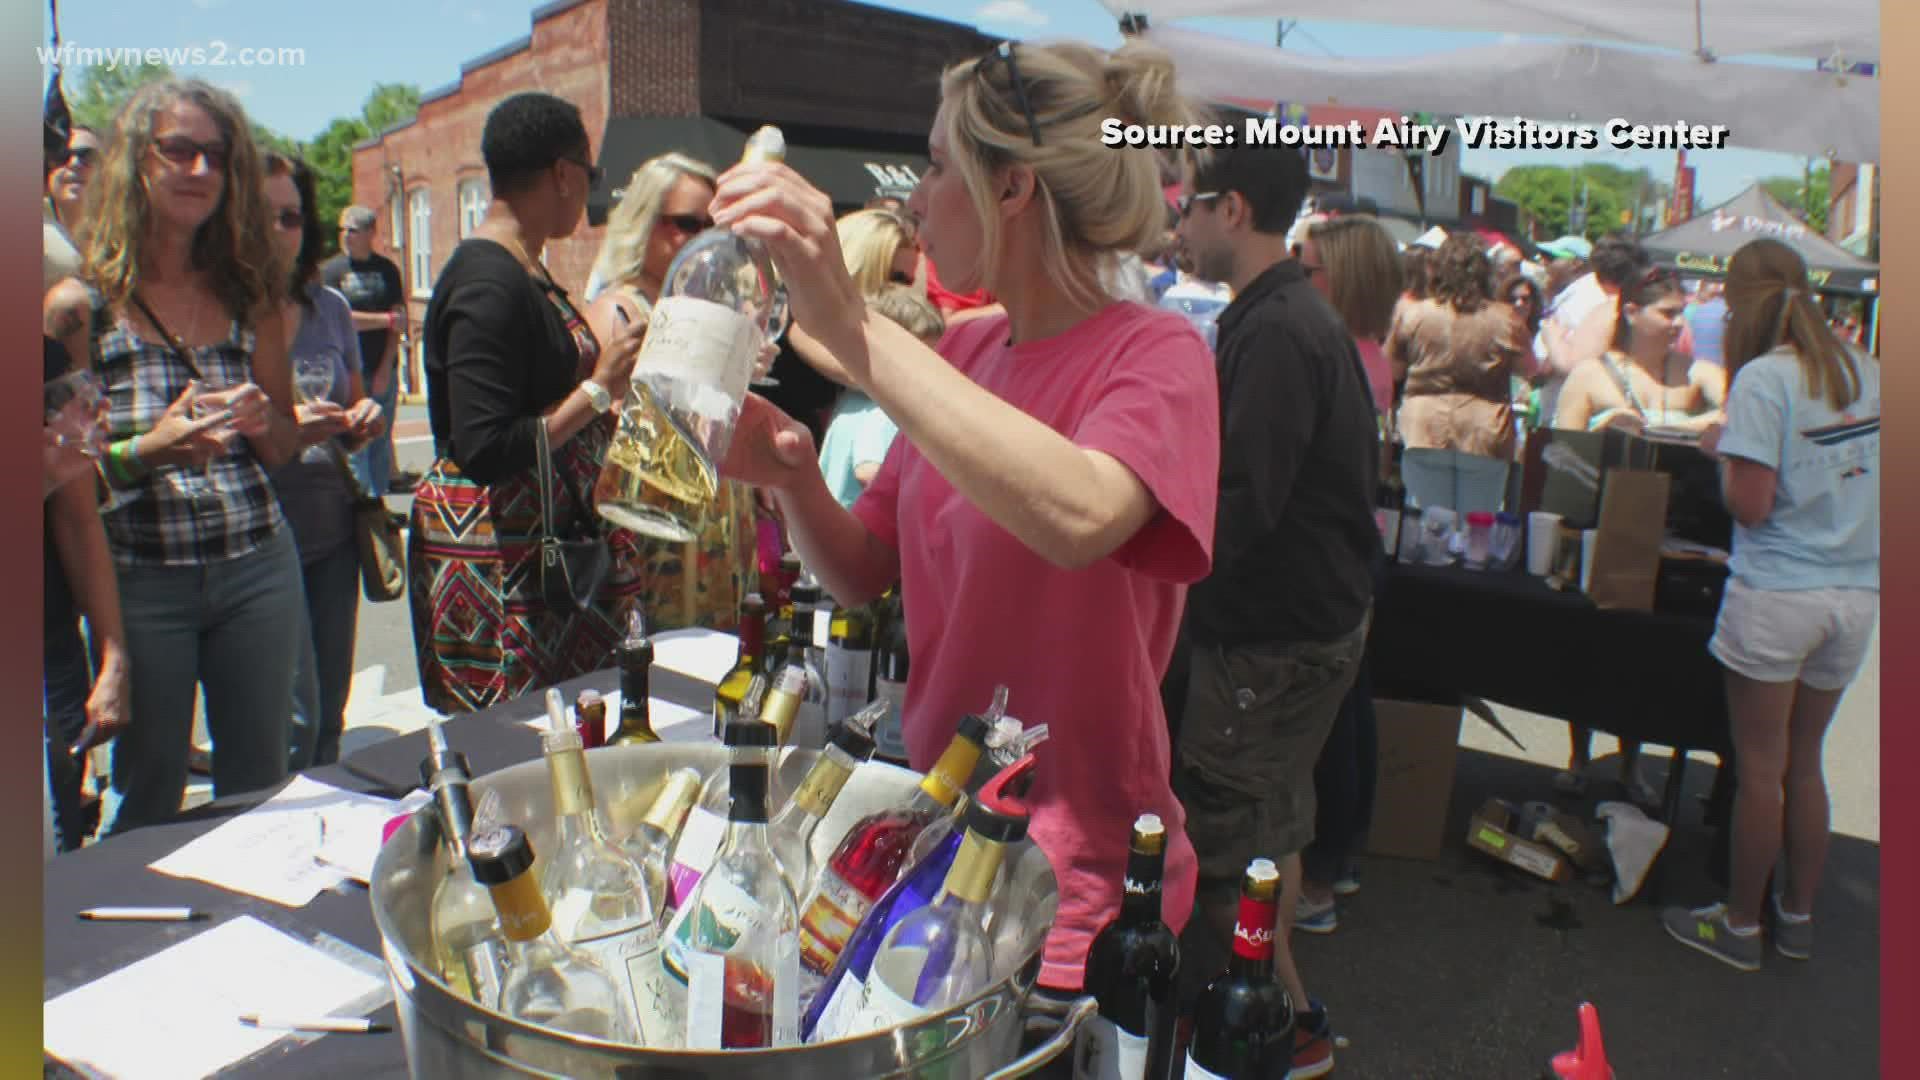 The 11th annual Budbreak Wine and Craft Beer festival features North Carolina wineries and craft beer producers.